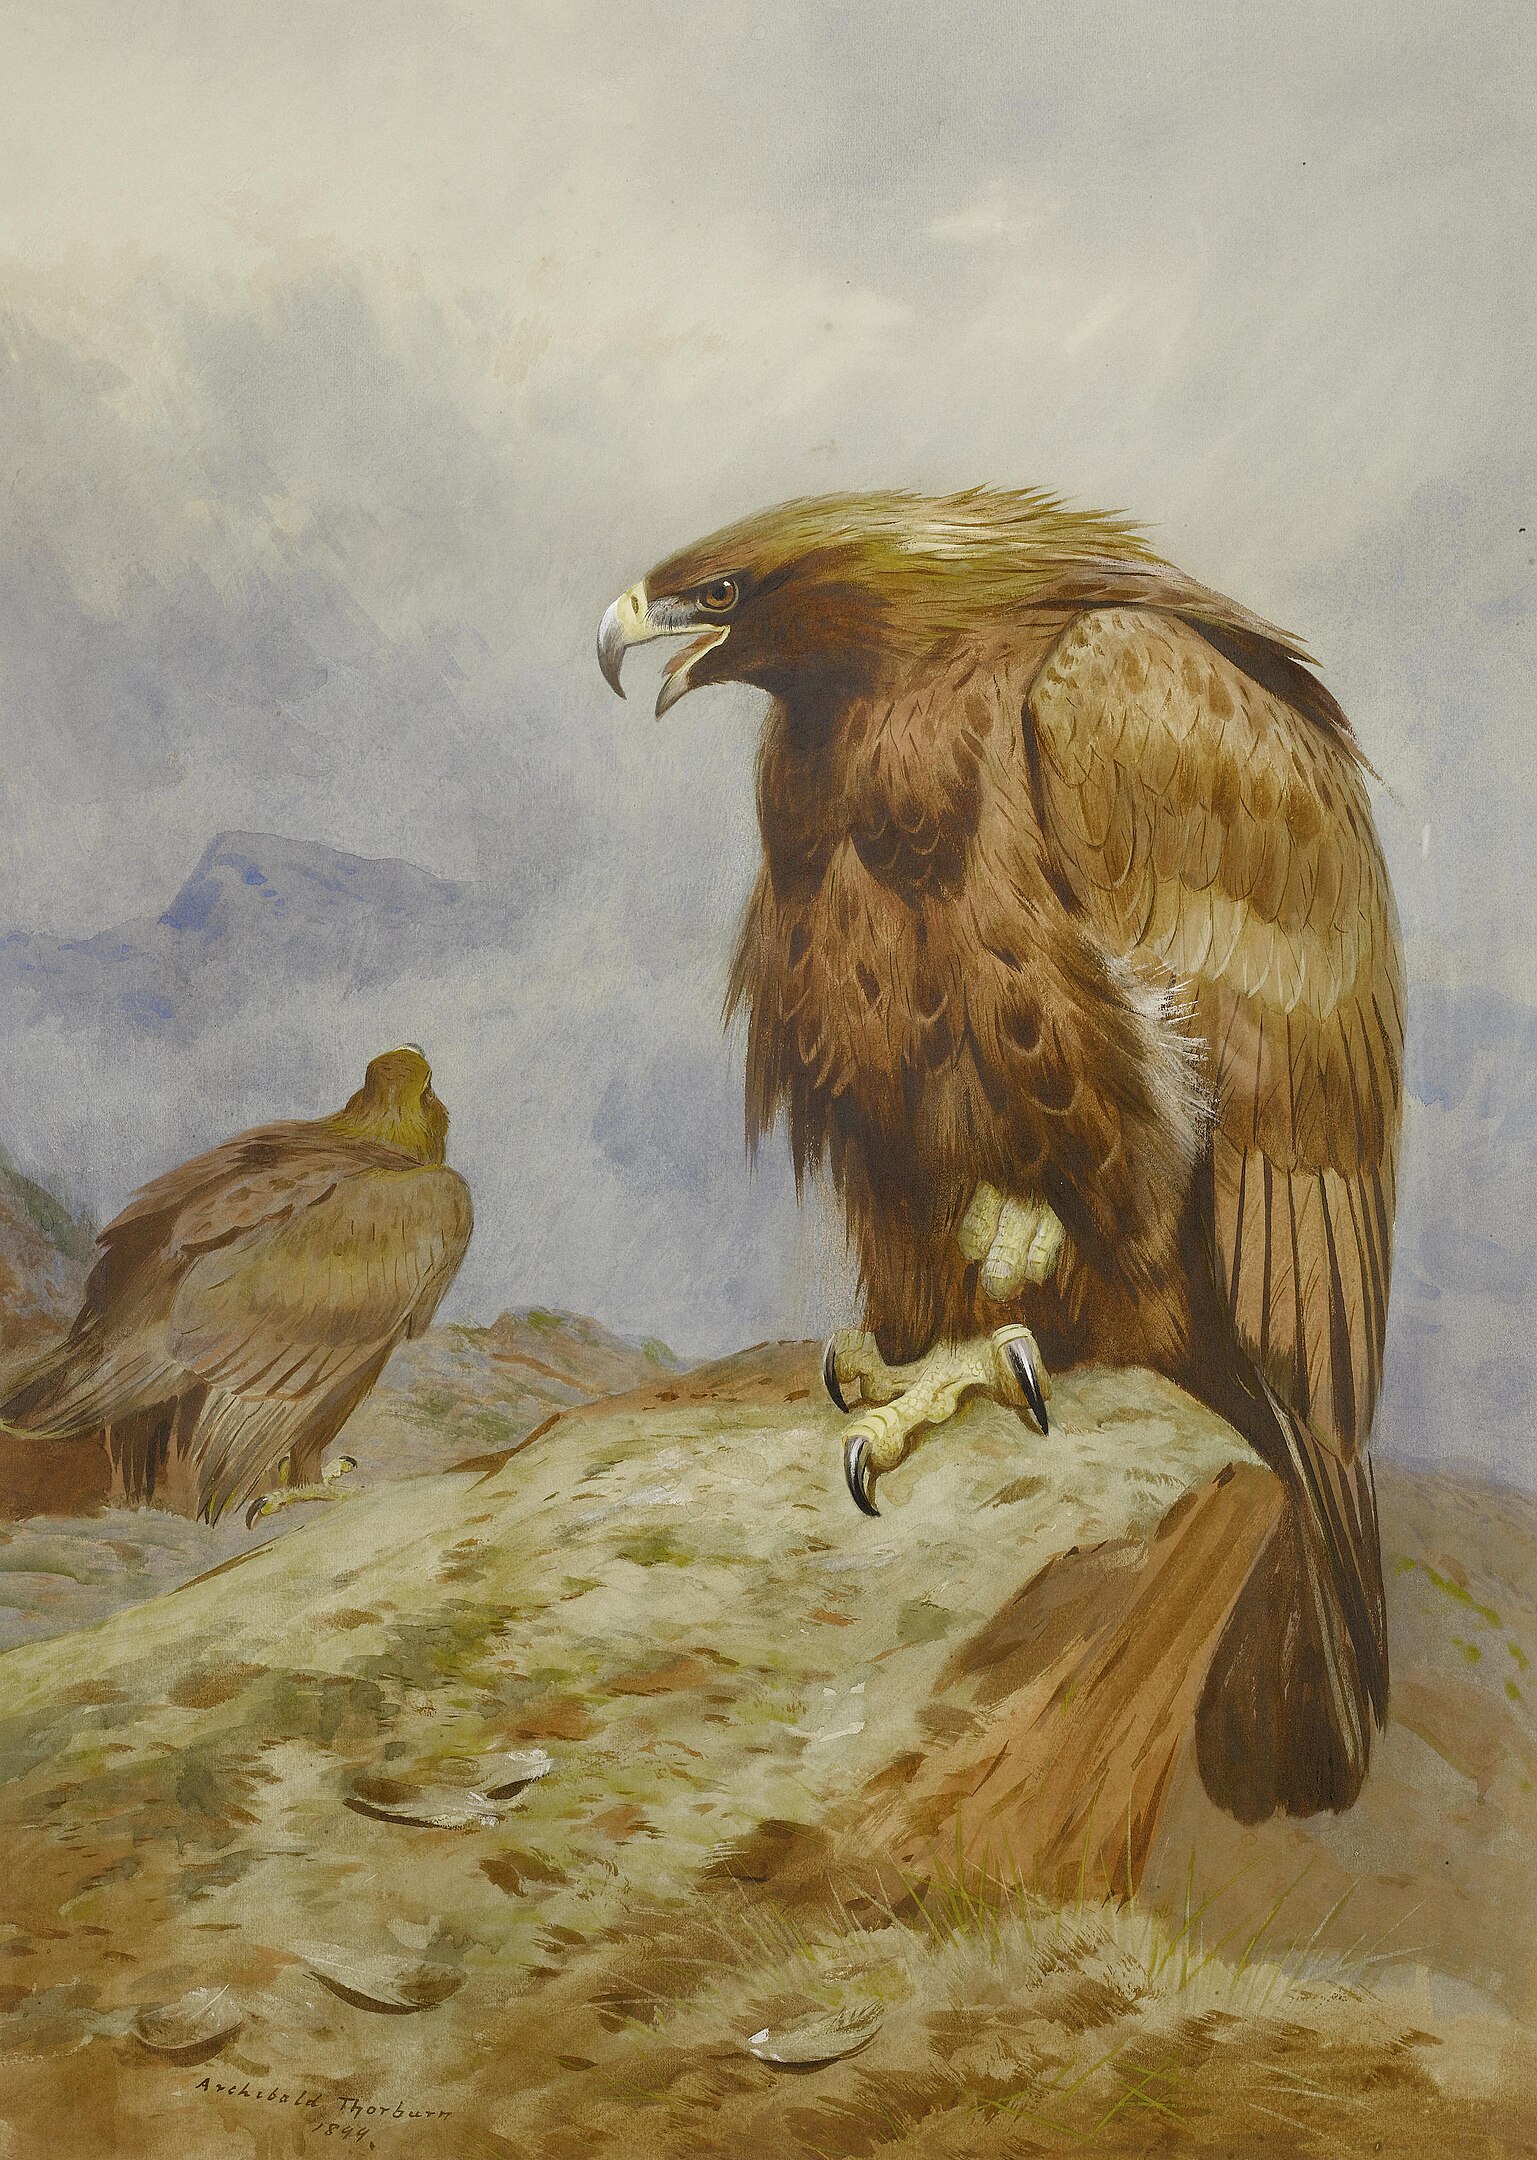 A pair of eagles on grassland